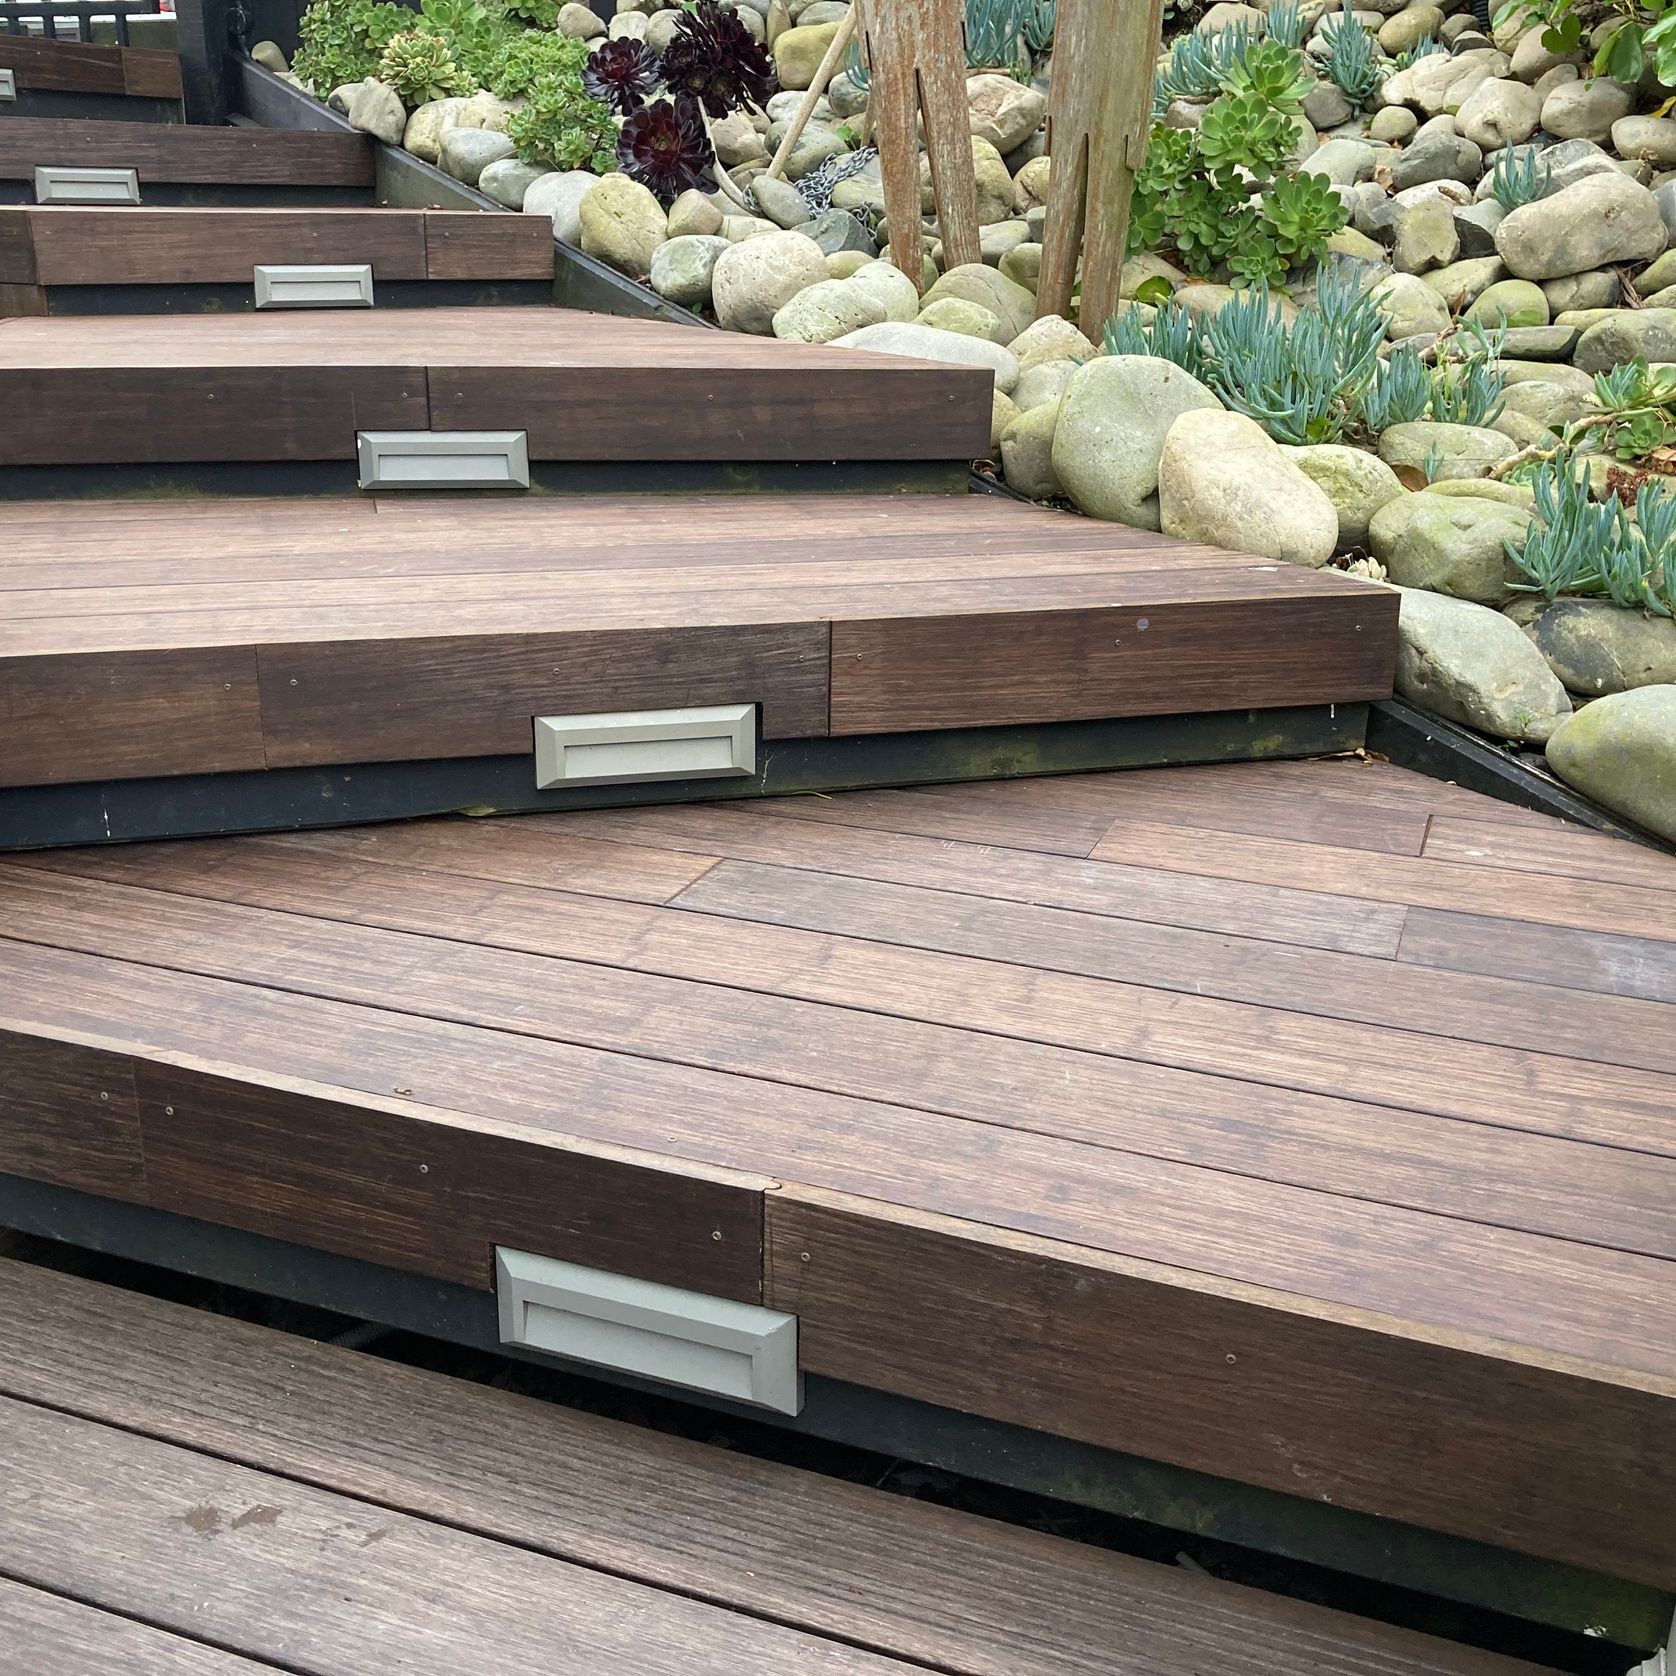 Bamboo X-treme Decking Stairs gallery detail image